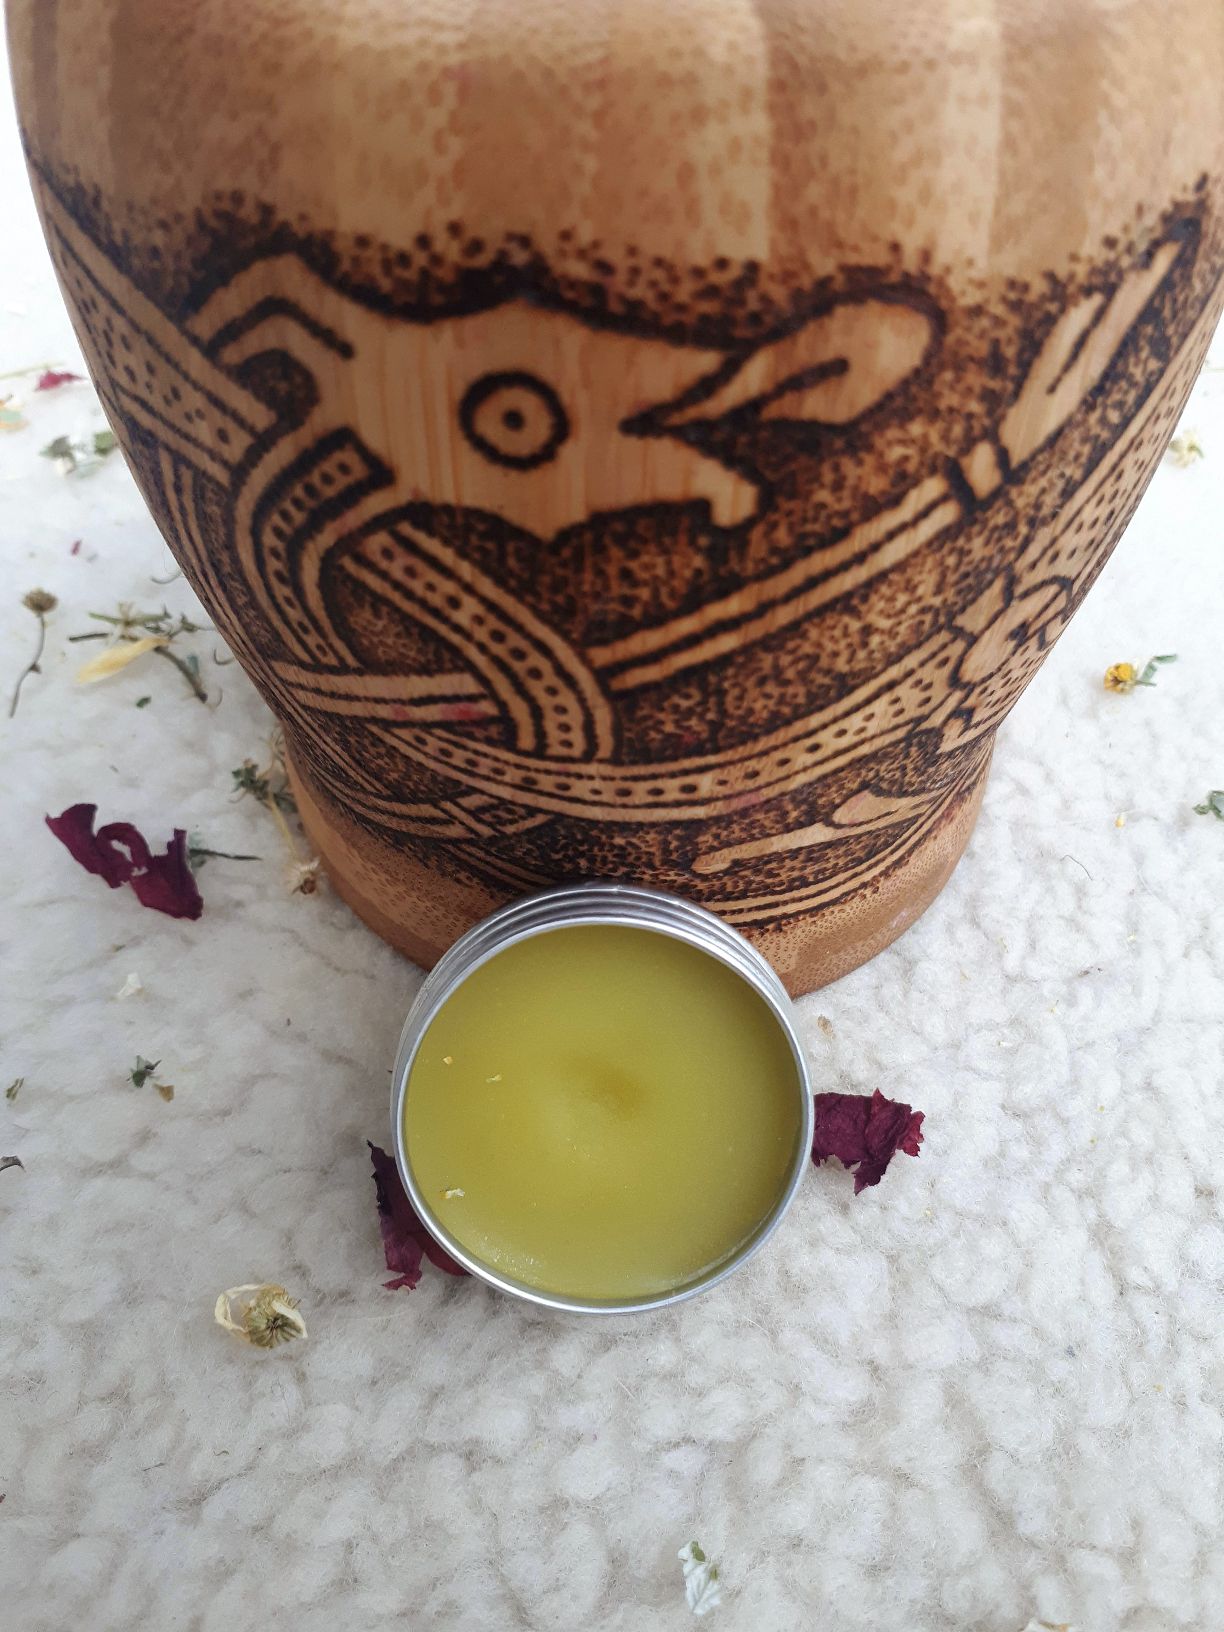 Sold Out - Eczema Balm